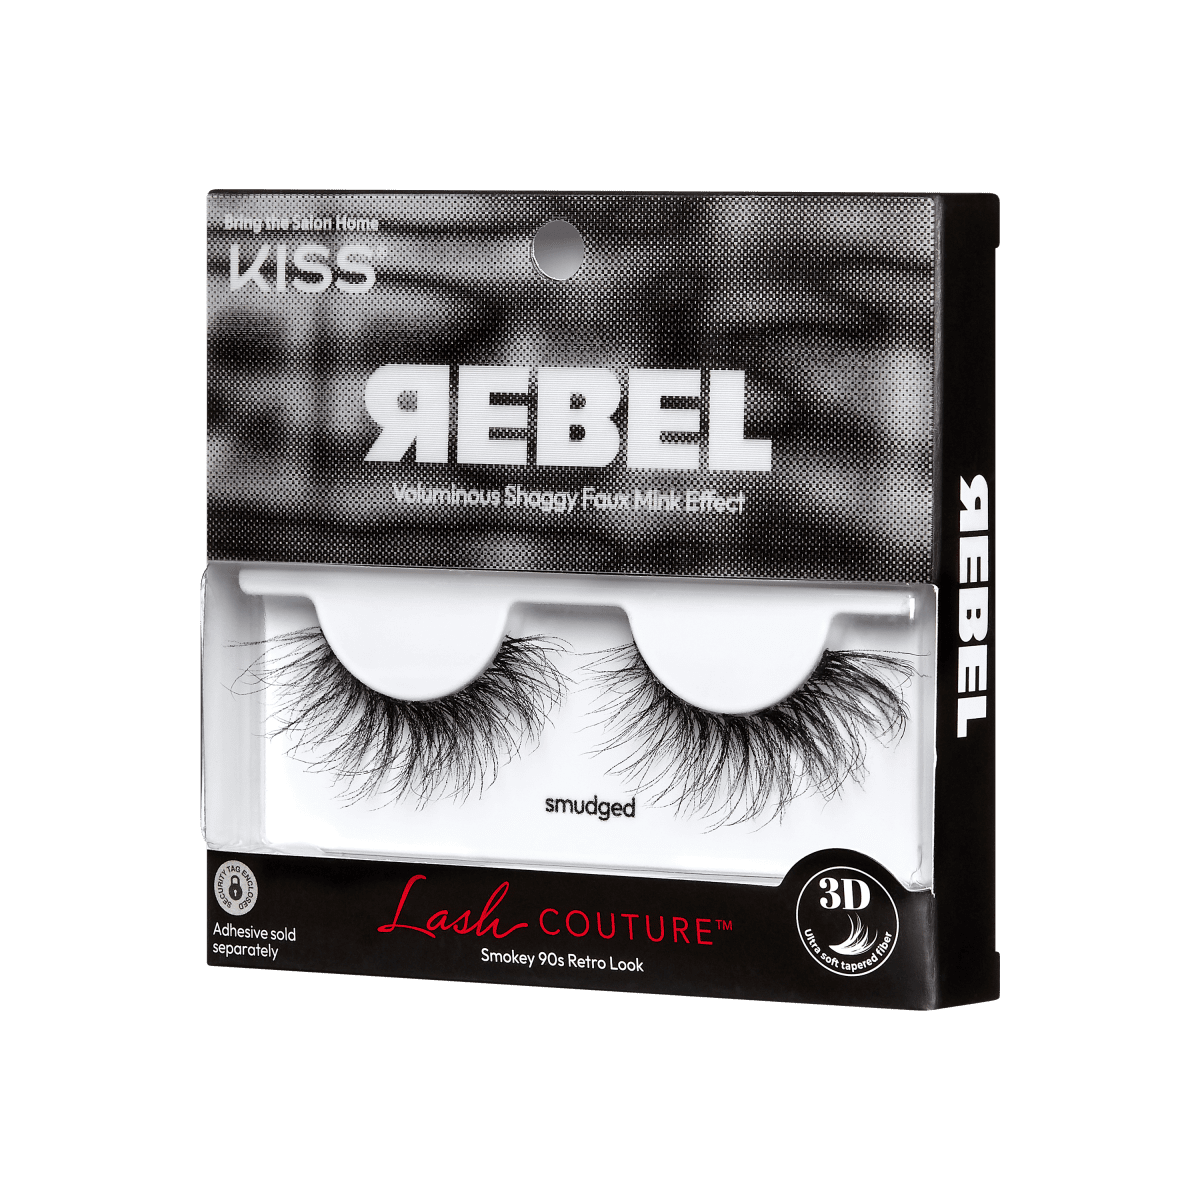 Packaging of faux mink lashes from the Rebel collection by KISS. The box features a pair of dramatic voluminous false eyelashes.